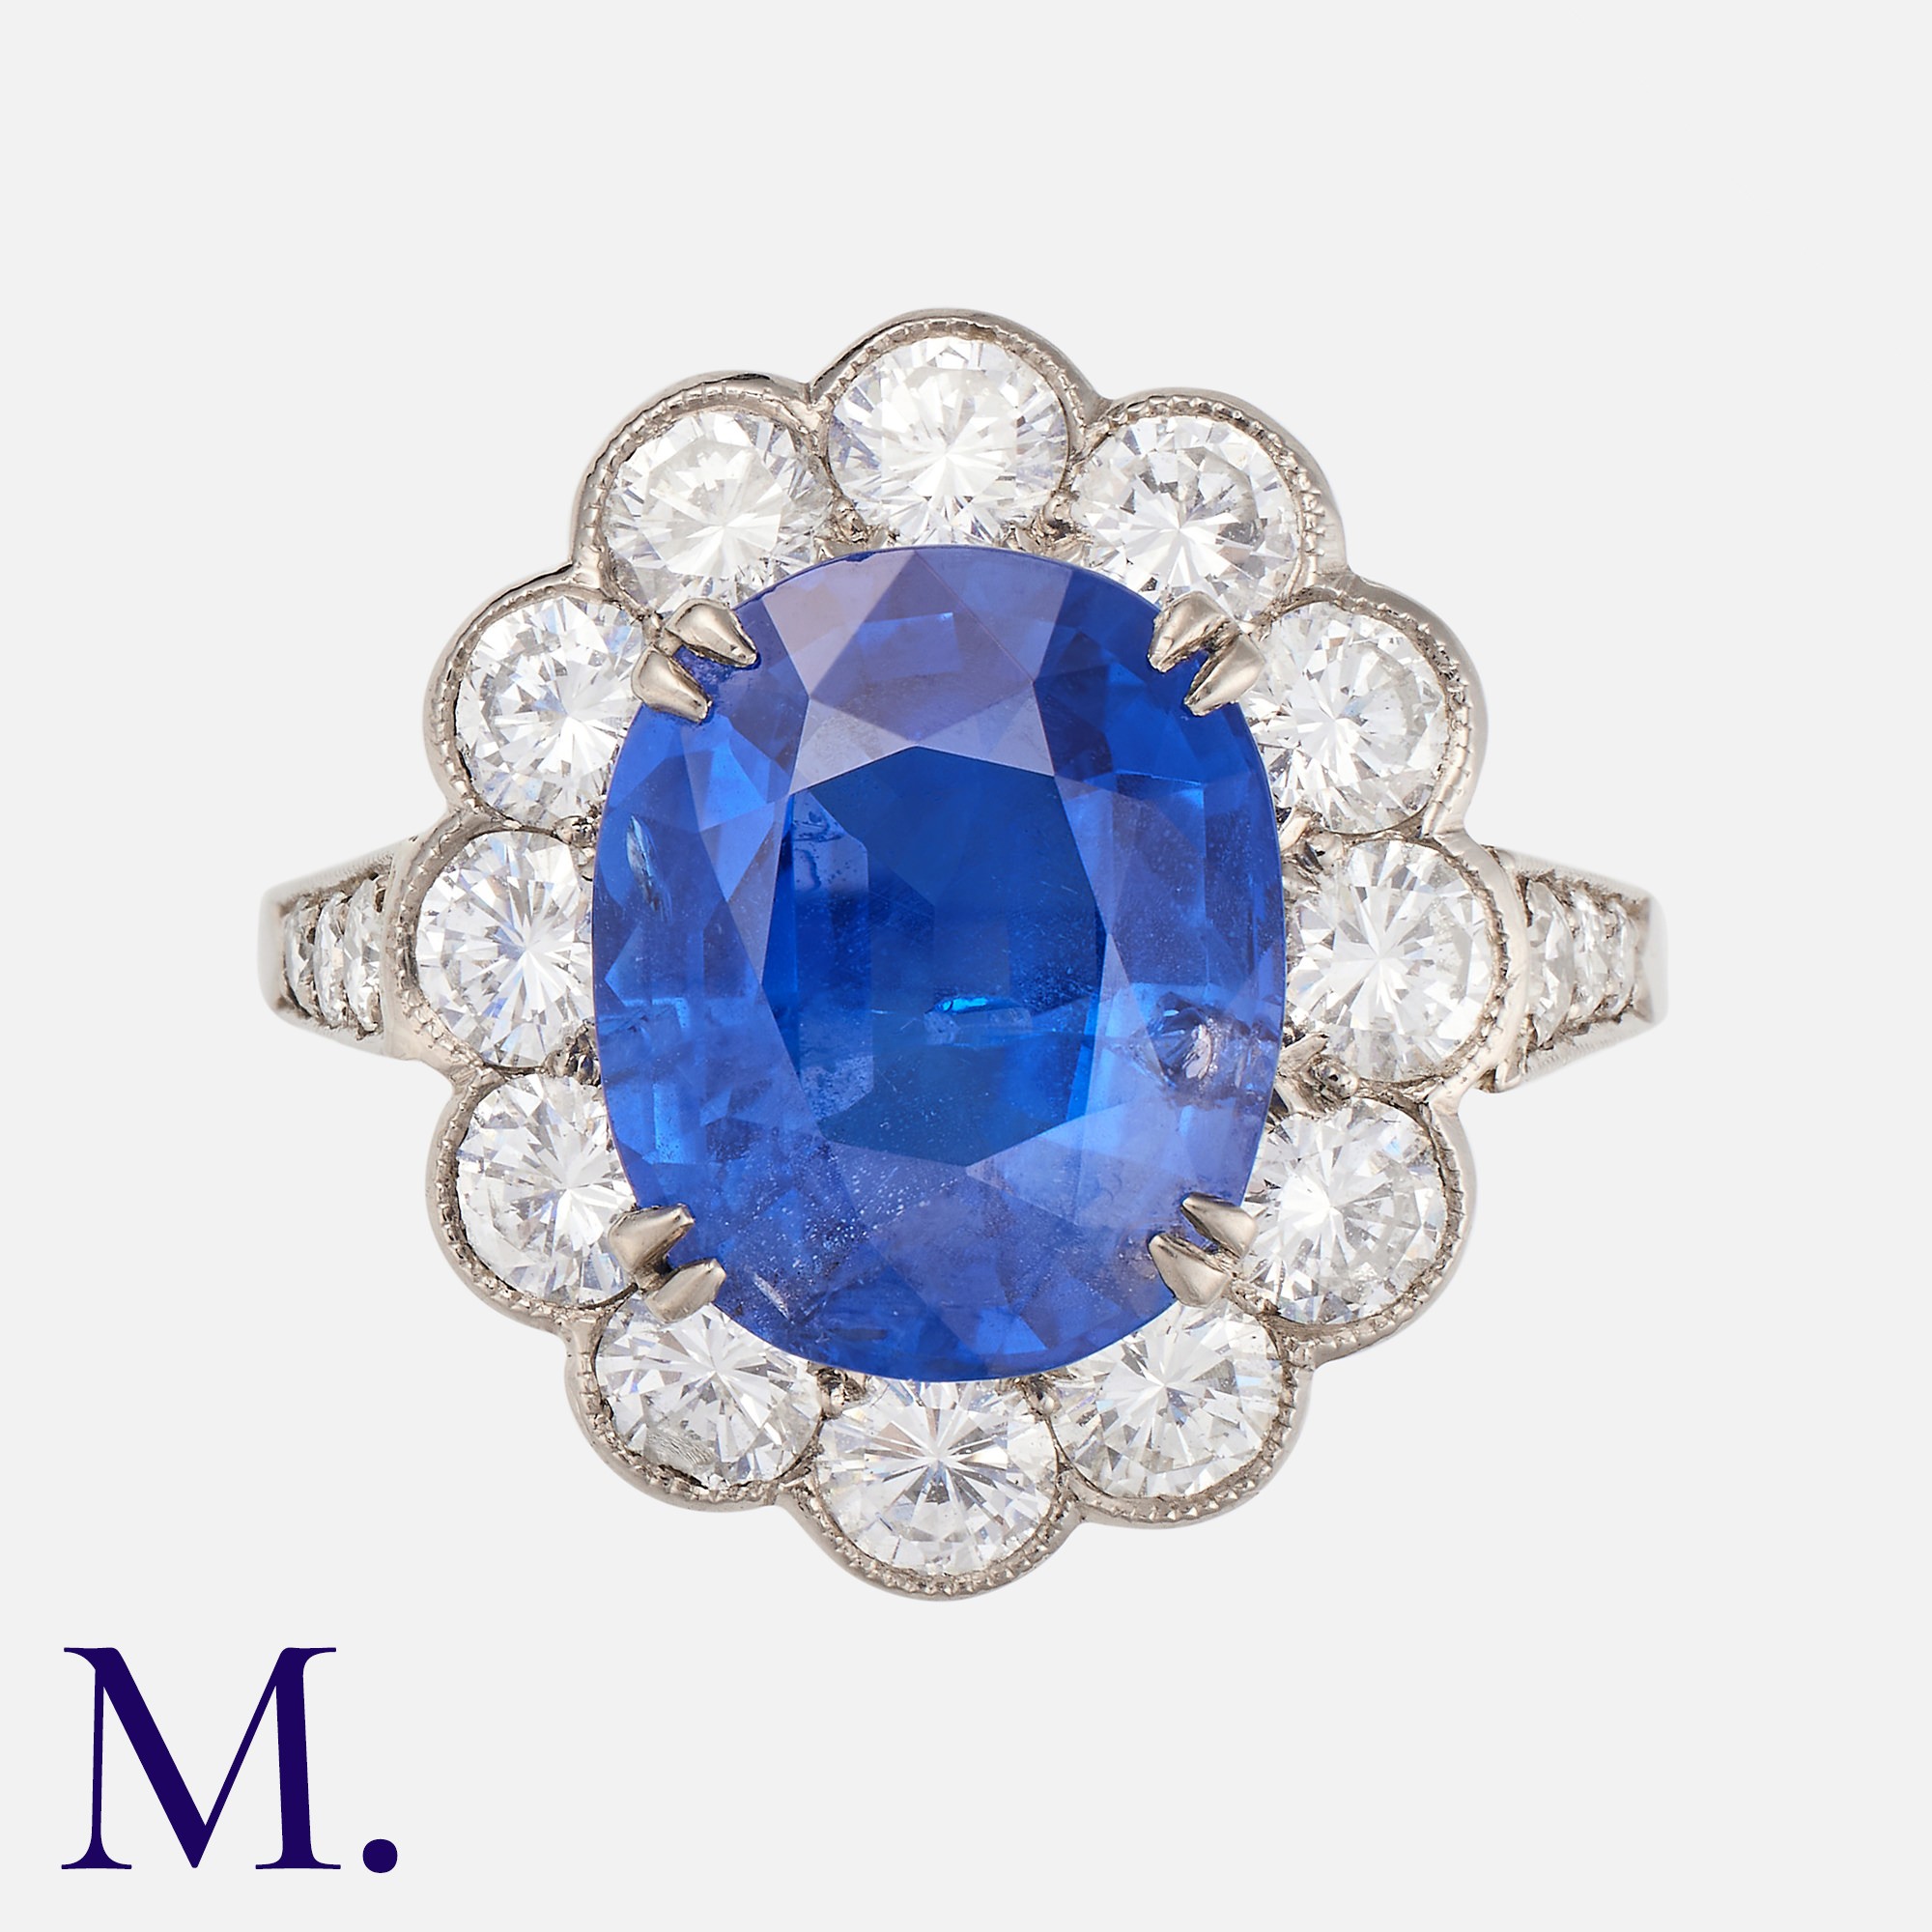 A Burma No Heat Sapphire And Diamond Cluster Ring in platinum, set with a principal blue sapphire of